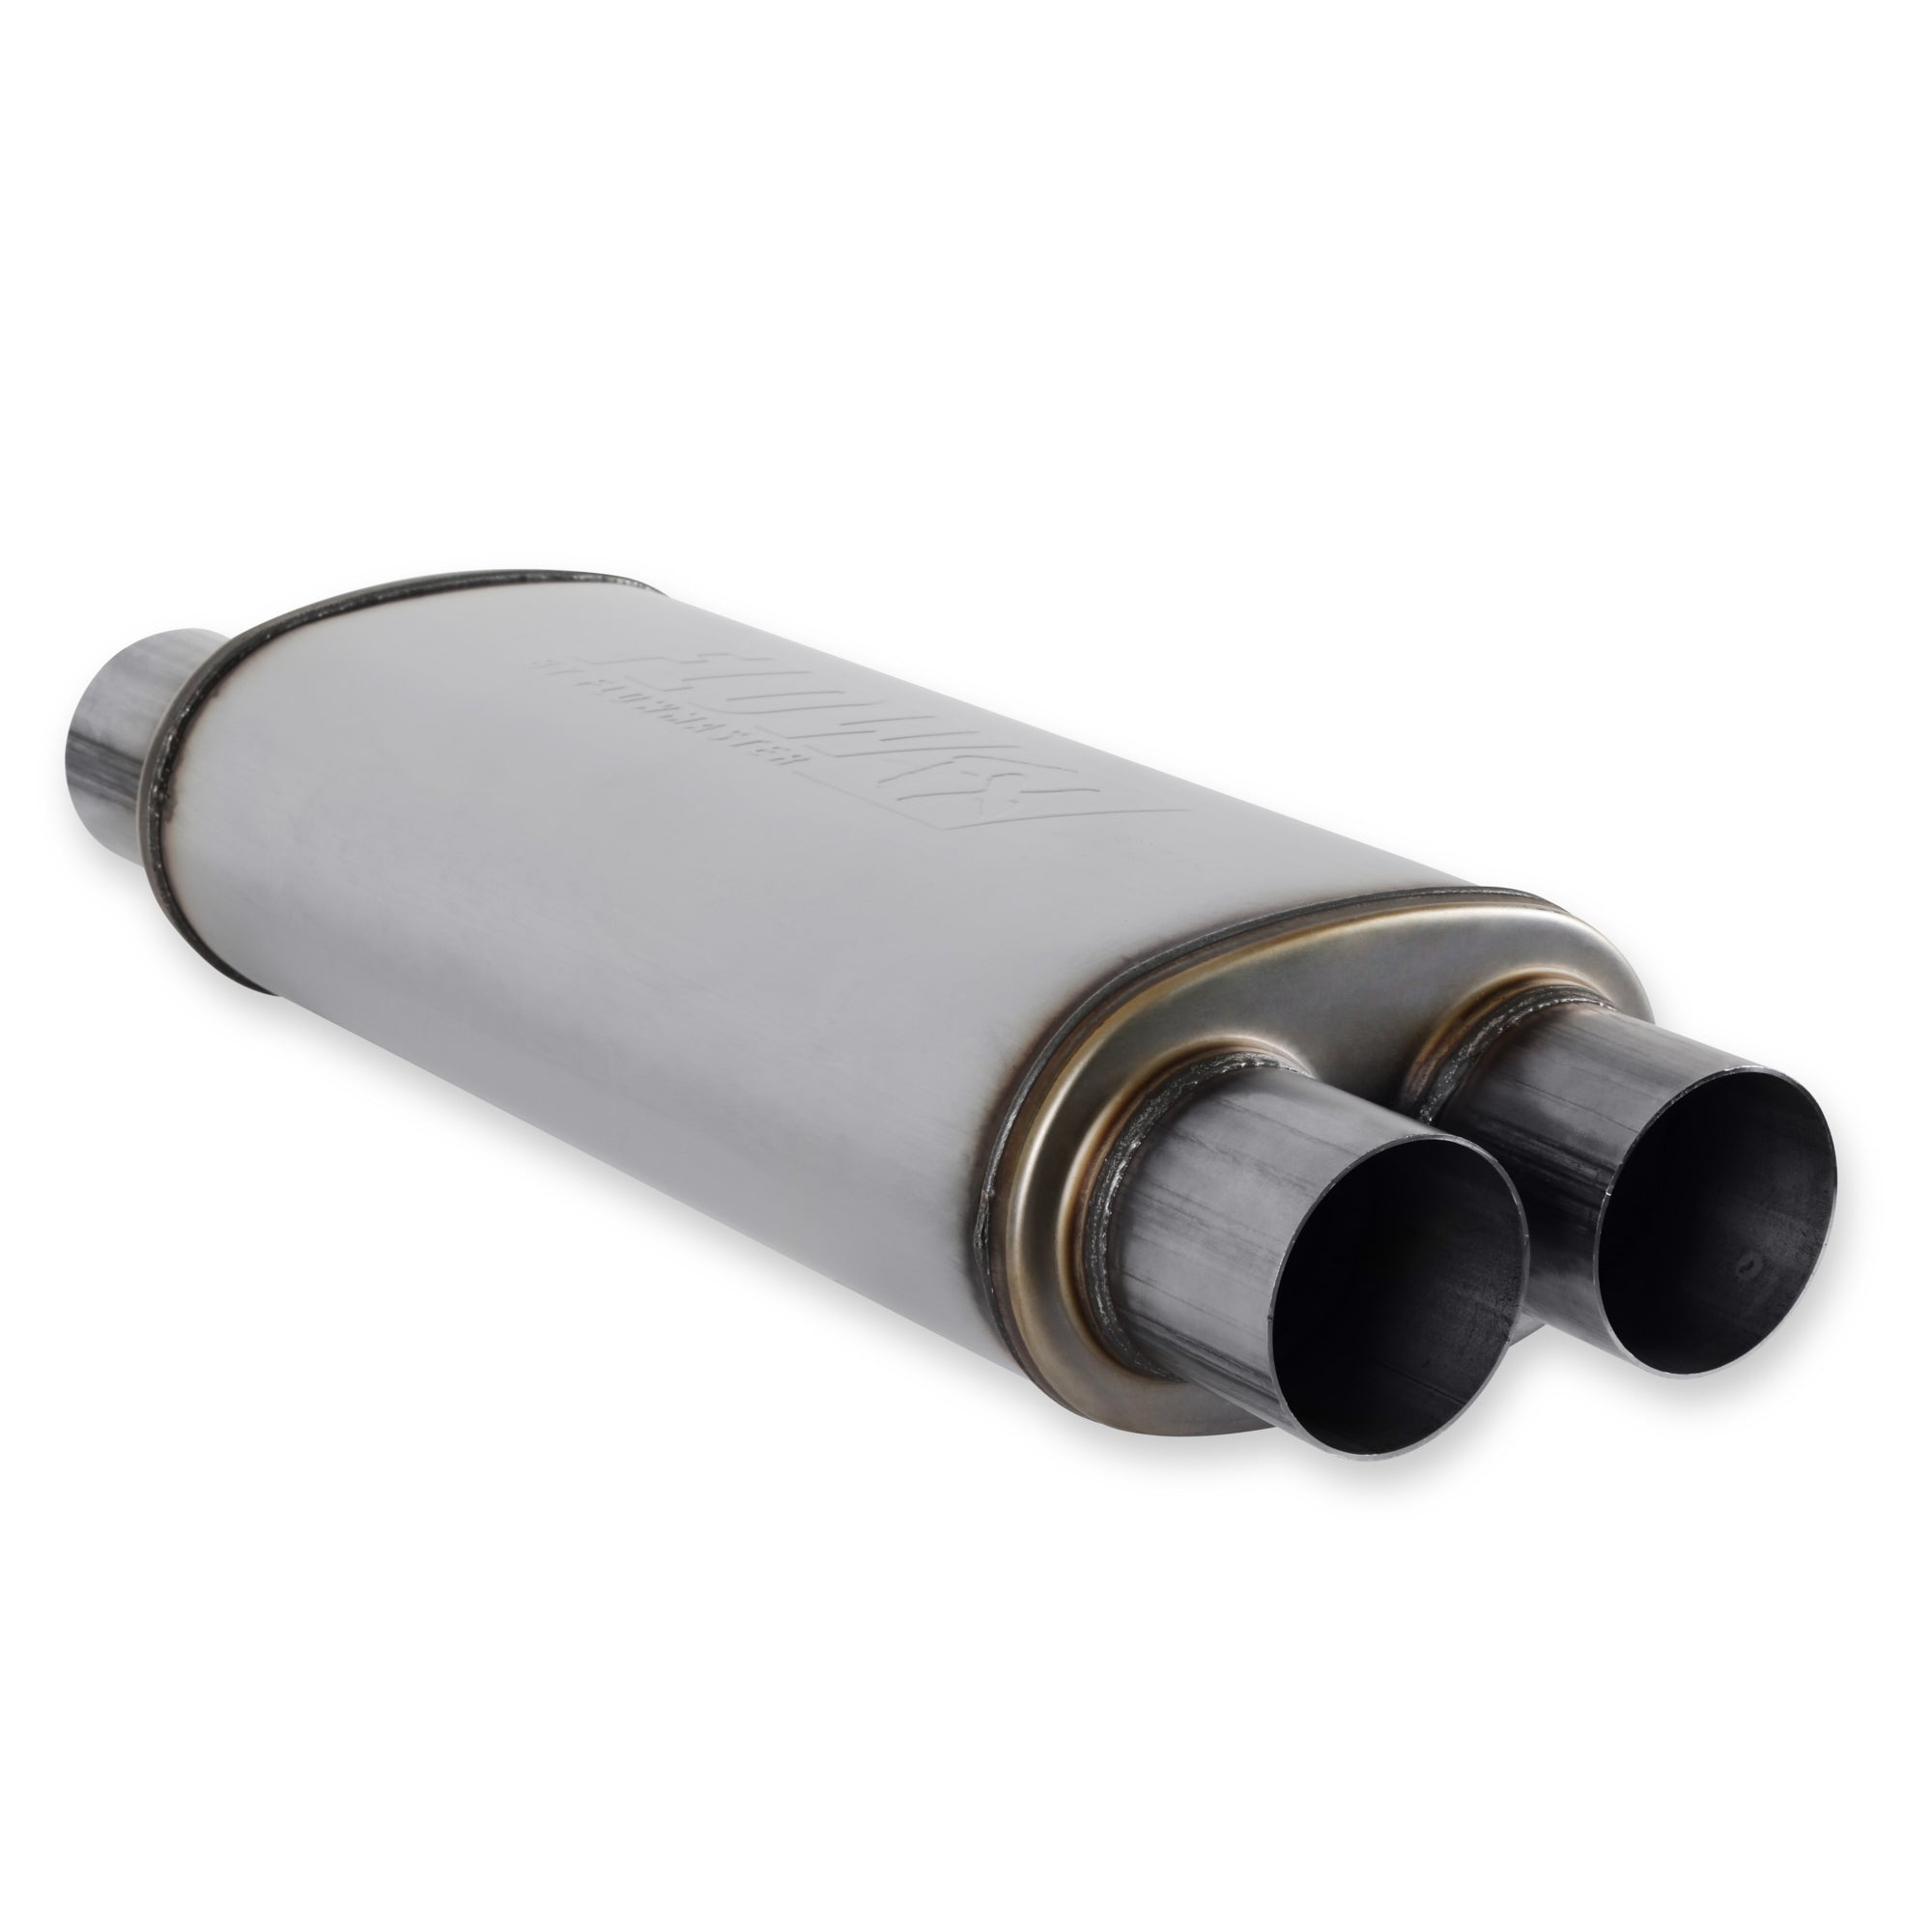 Flowmaster Muffler 3-1/2 Inlet 2-1/ 2 Dual Outlet Mufflers and Resonators Mufflers and Components main image